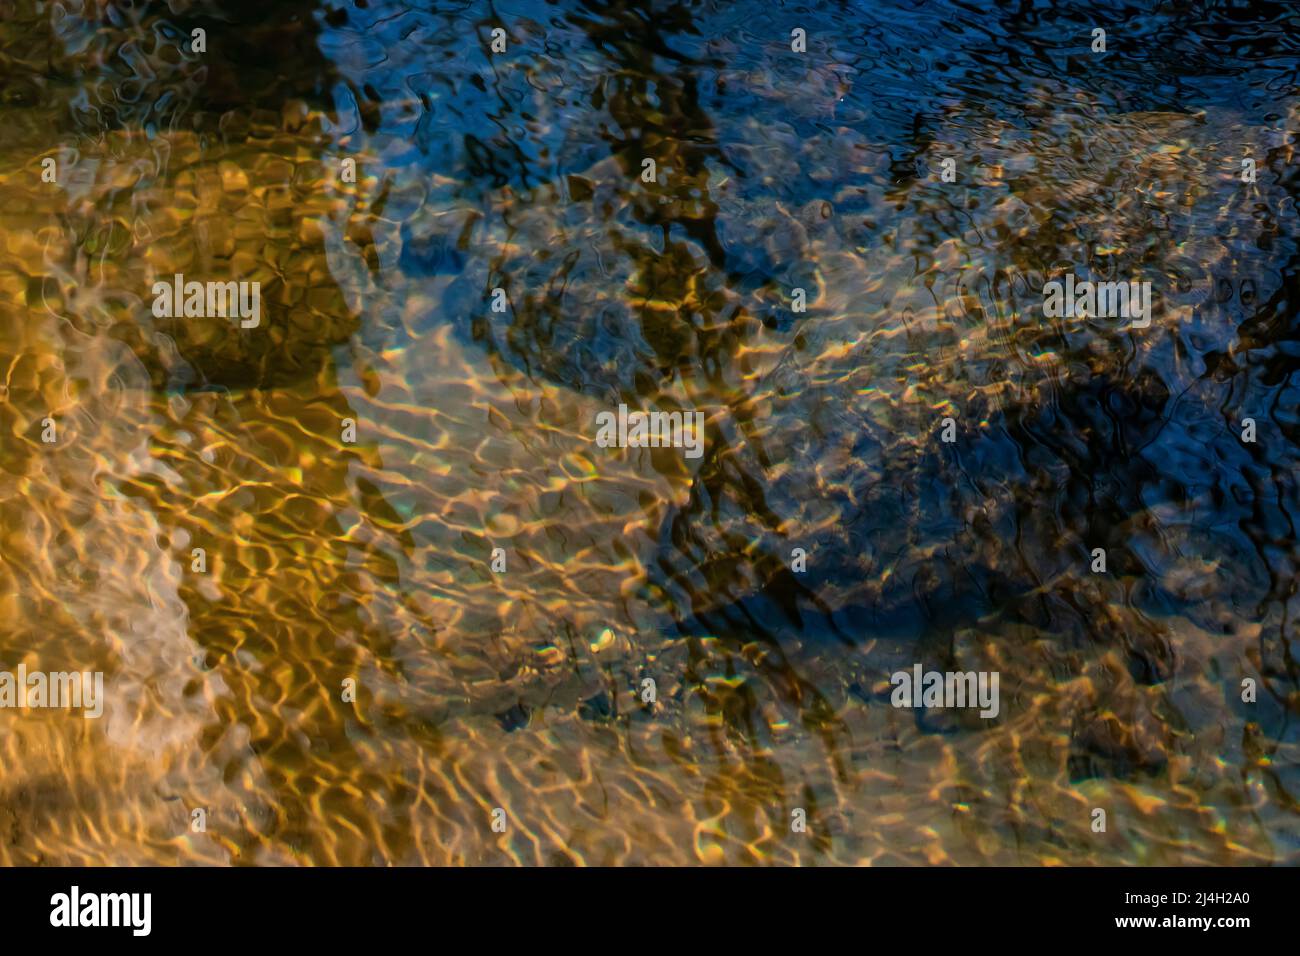 Ripples catching sunlight on the surface of Mitchell Creek, Clay Cliffs Nature Area in Big Rapids, Michigan, USA Stock Photo